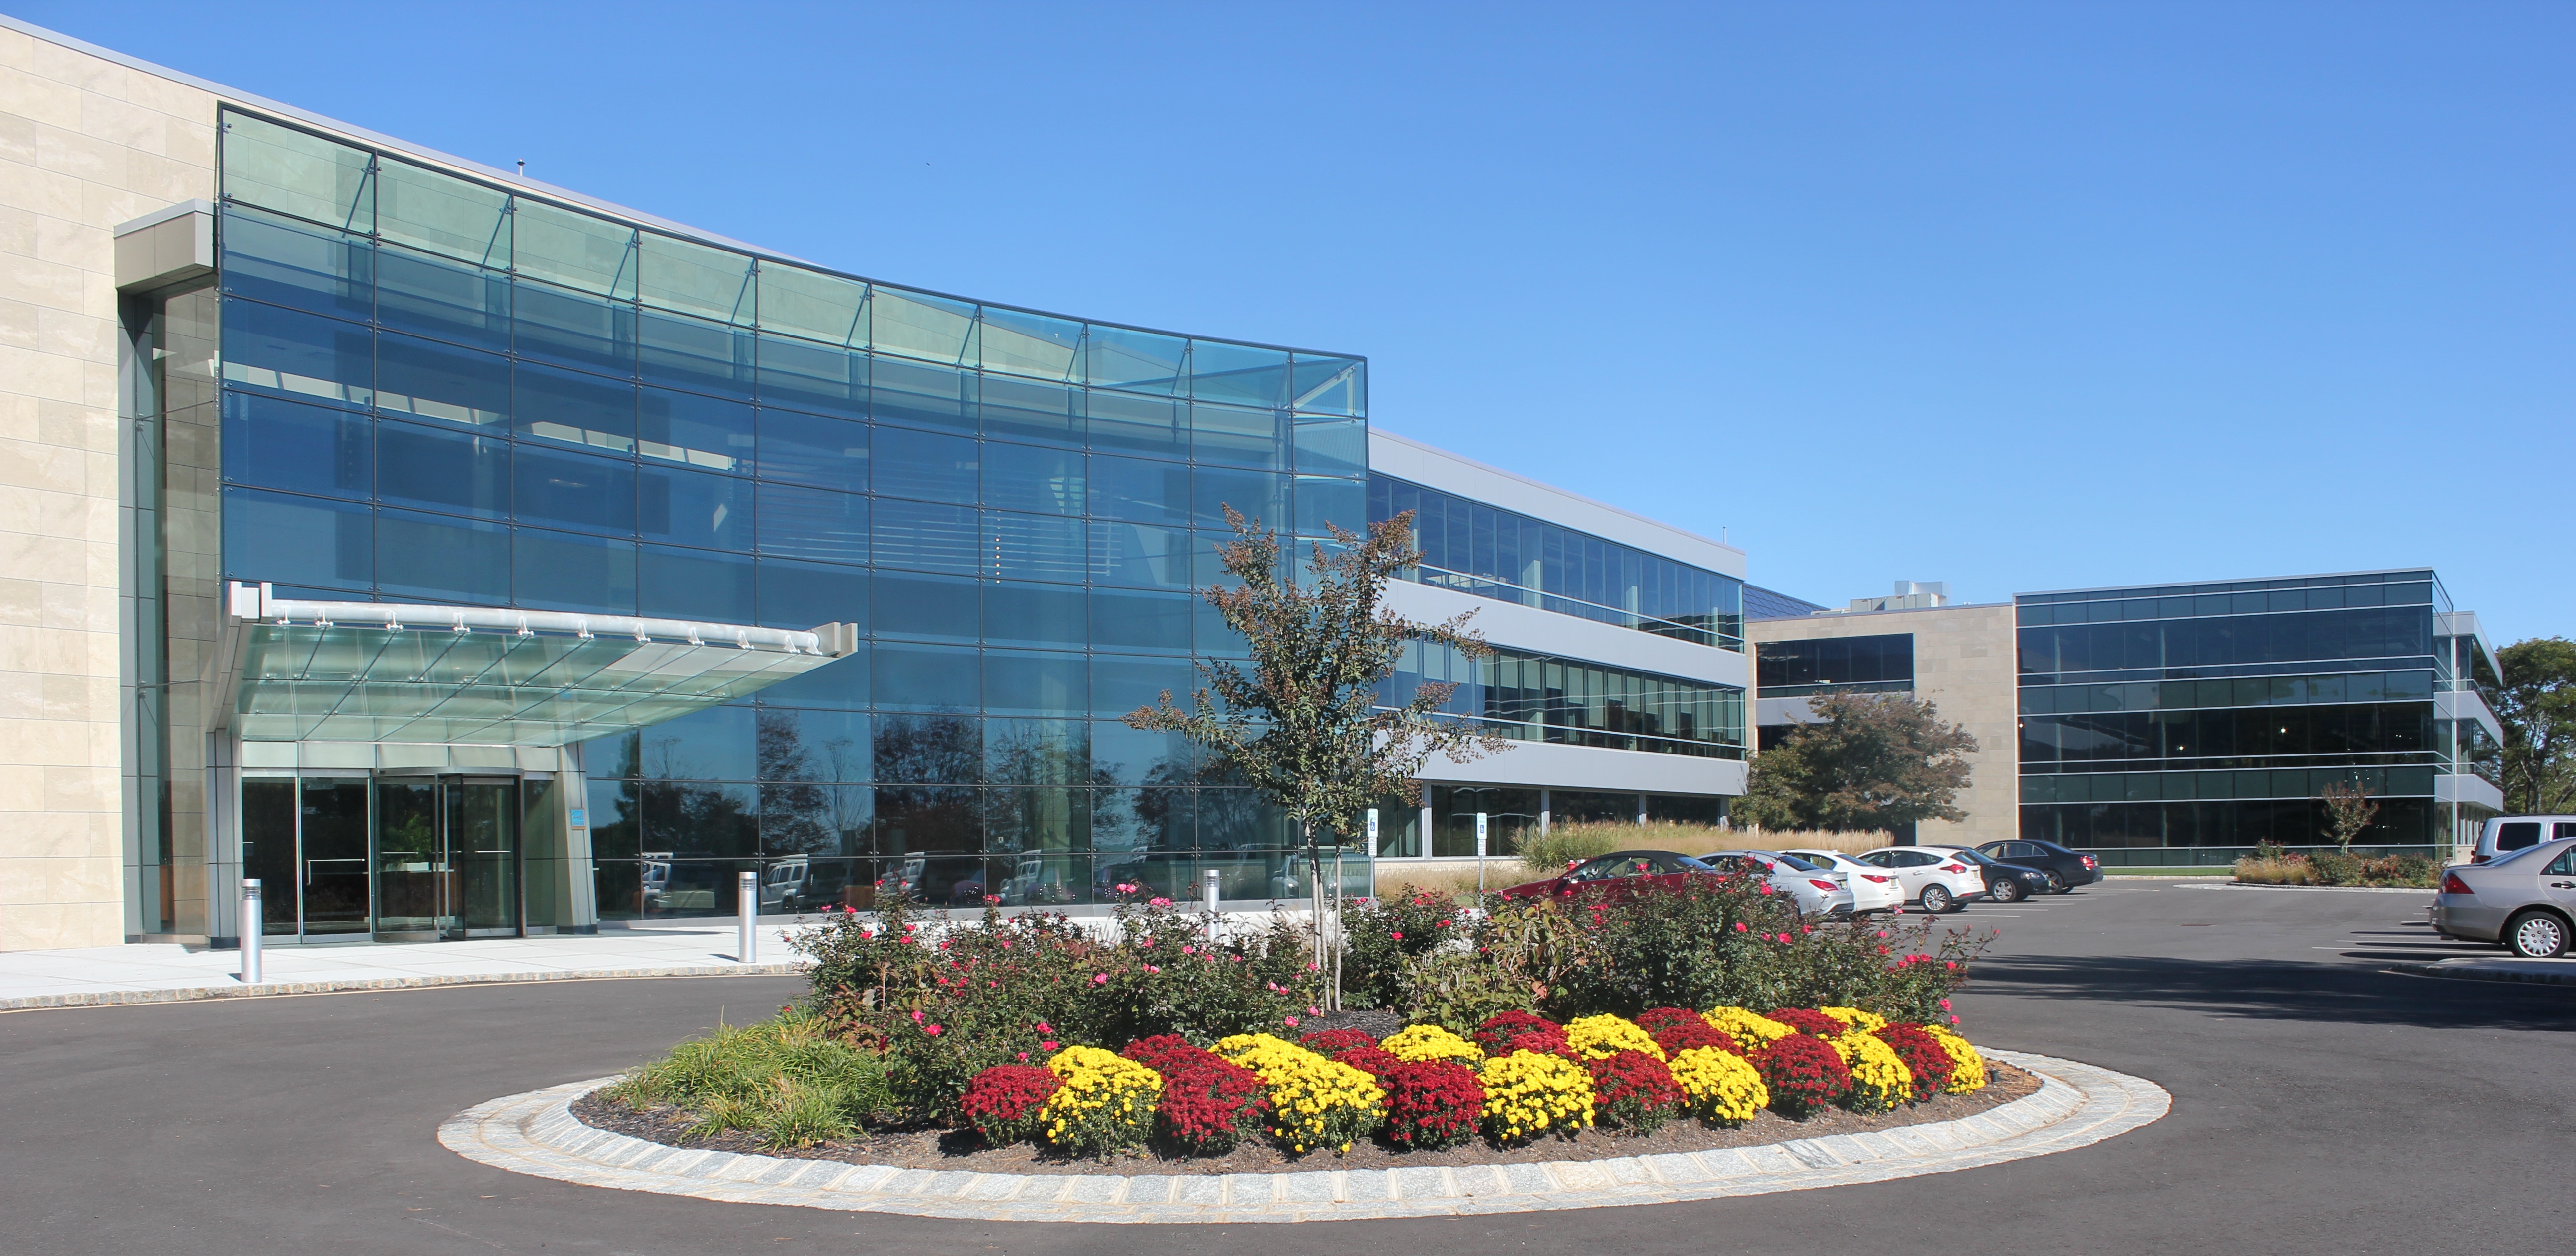 Office building located at 211 Mt. Airy Road, Basking Ridge, NJ